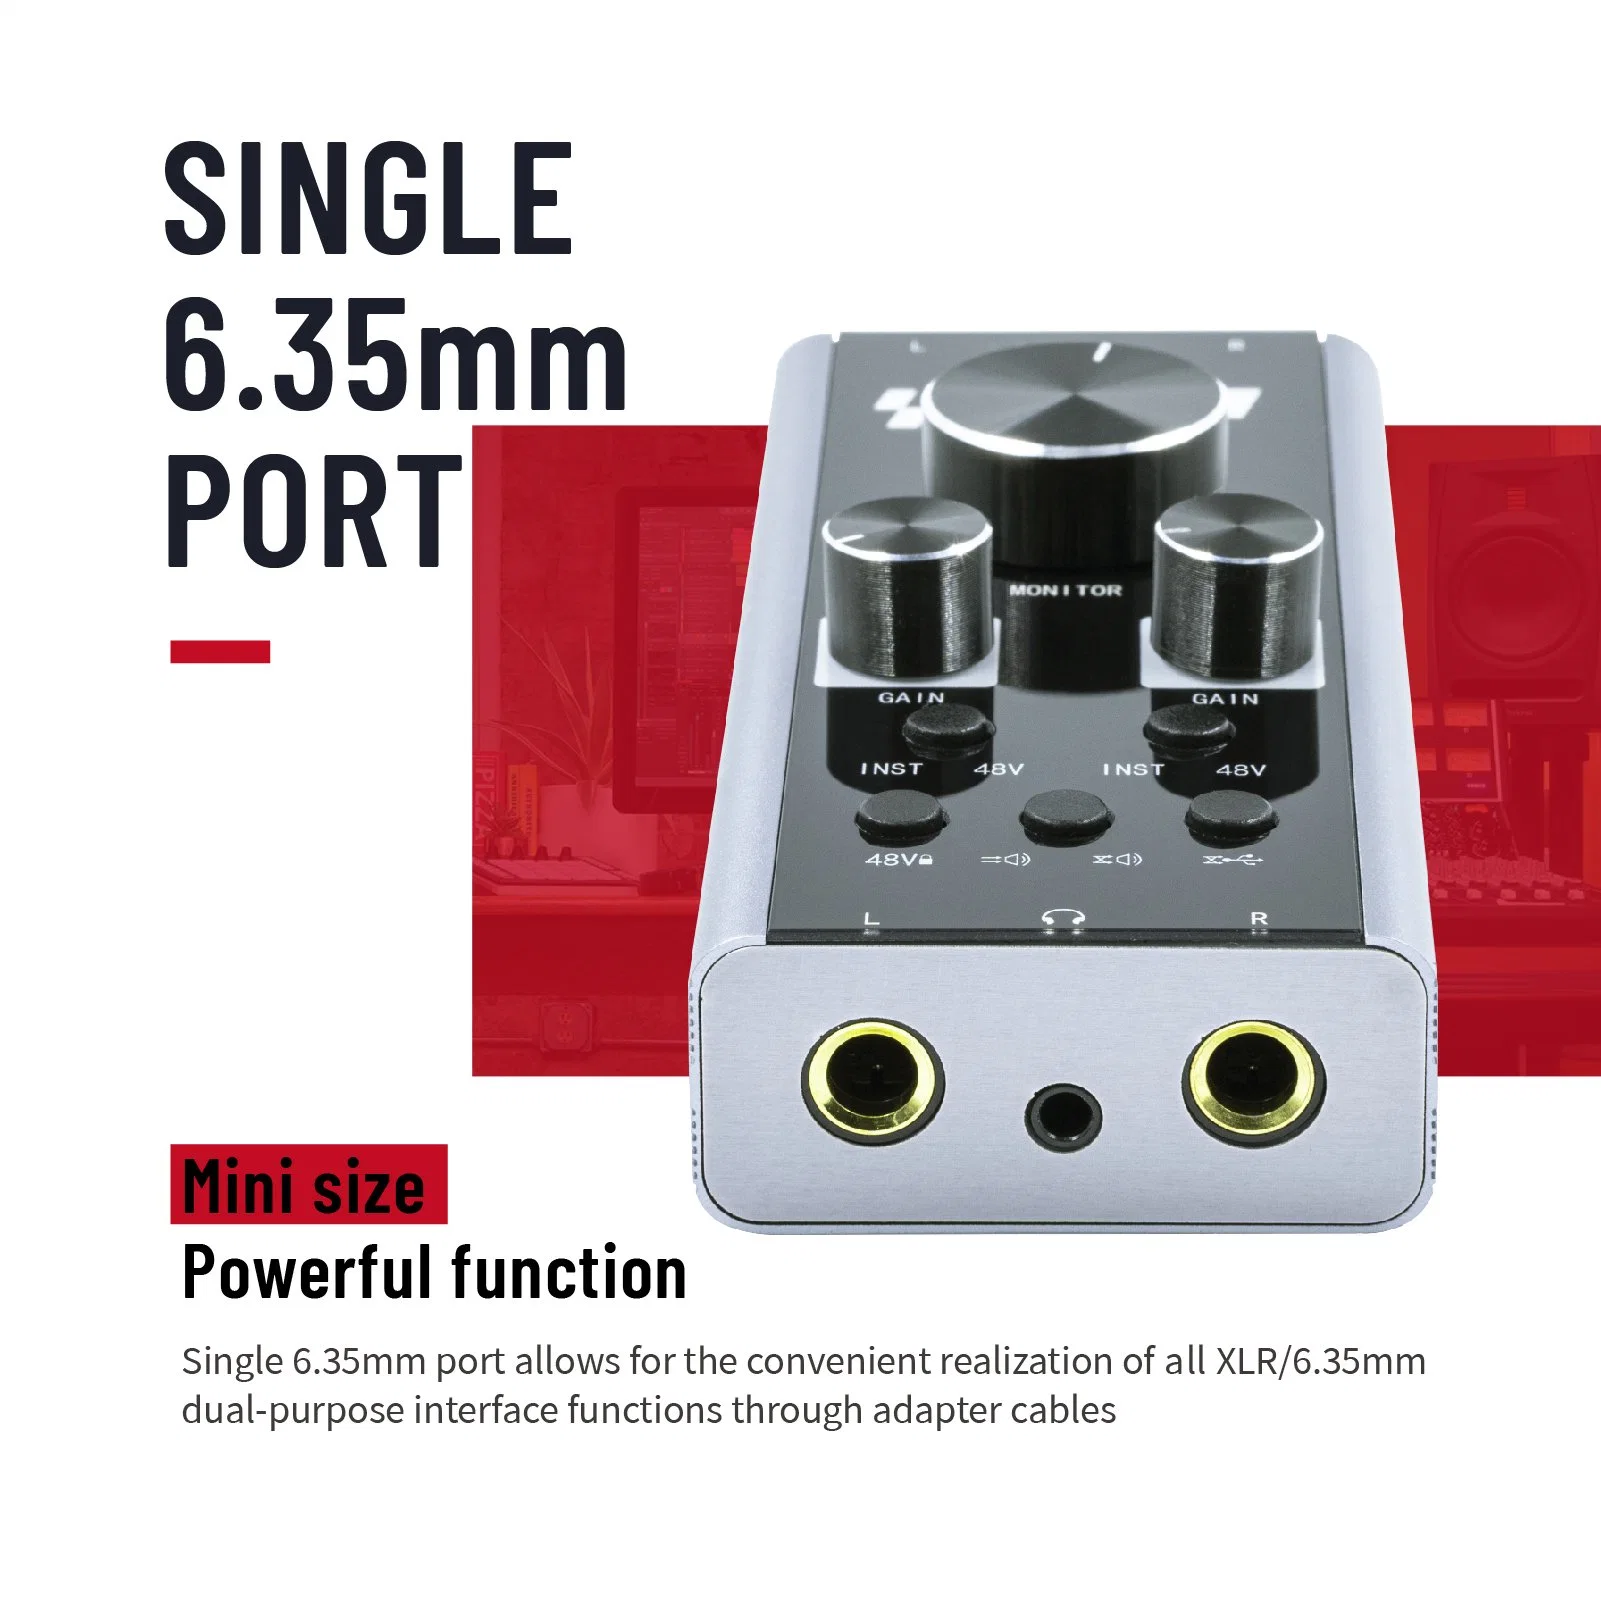 Simplefly Mini Audio Interface with 24bit 192kHz Sample Rate No Latency Perfect for Vocal/Instrument Recording